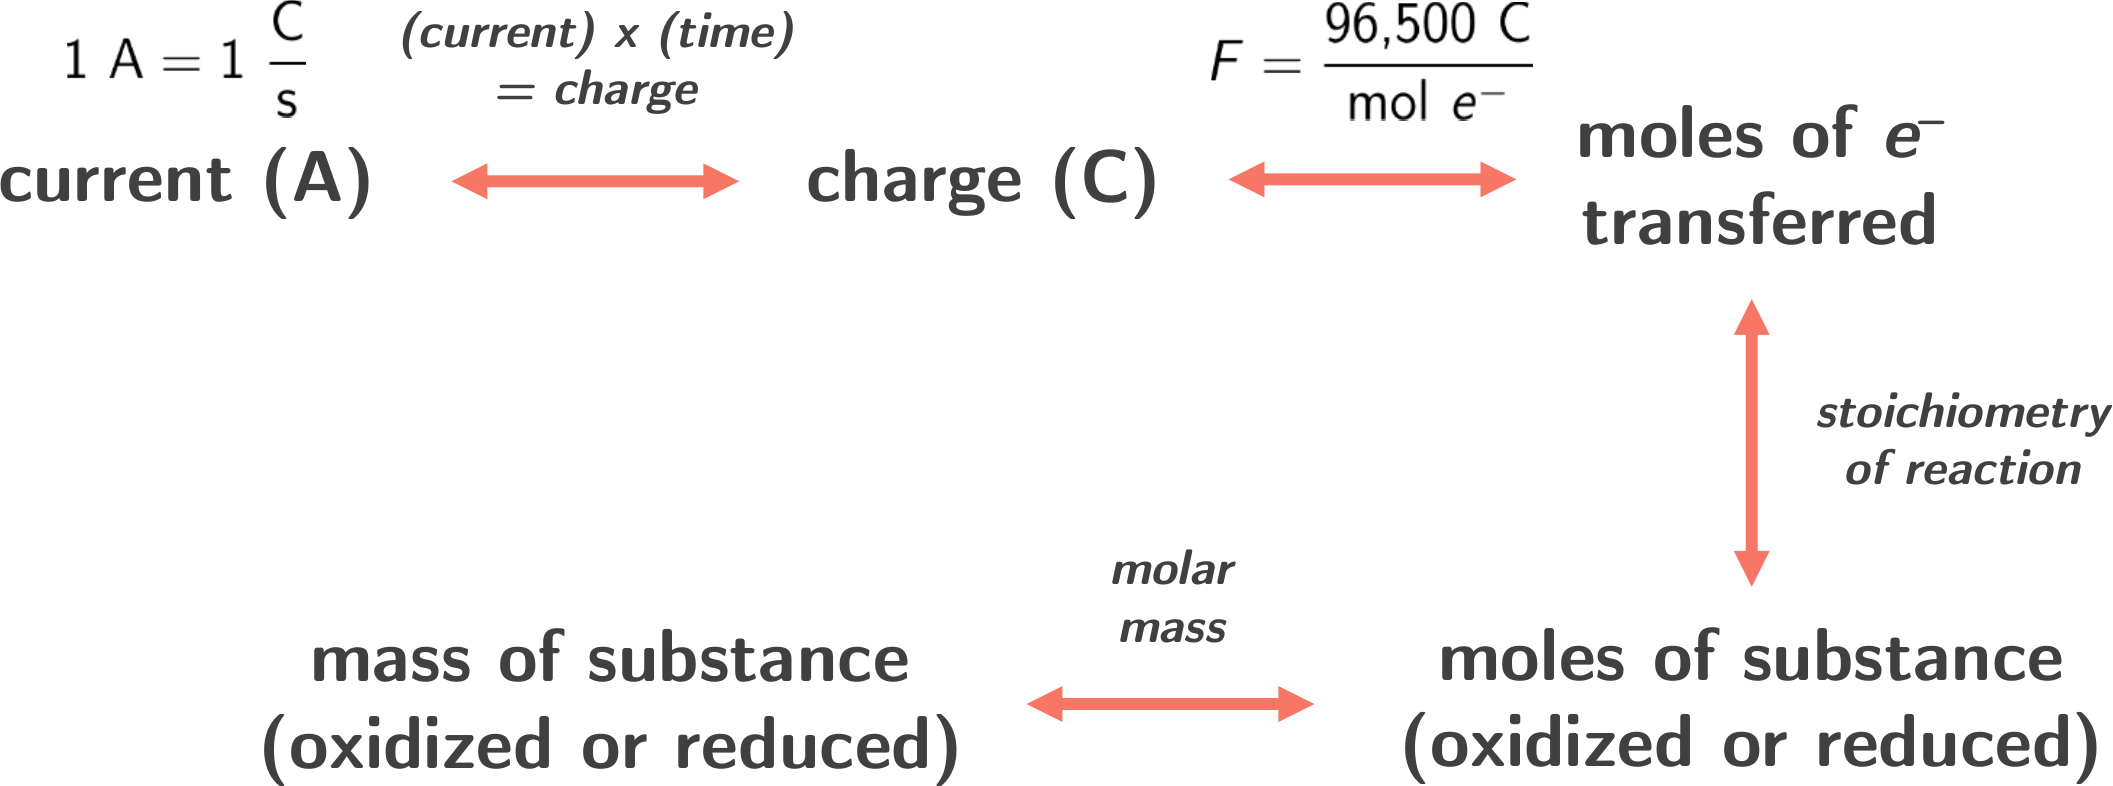 Flowchart for calculating various aspects of quantitative electrochemistry.